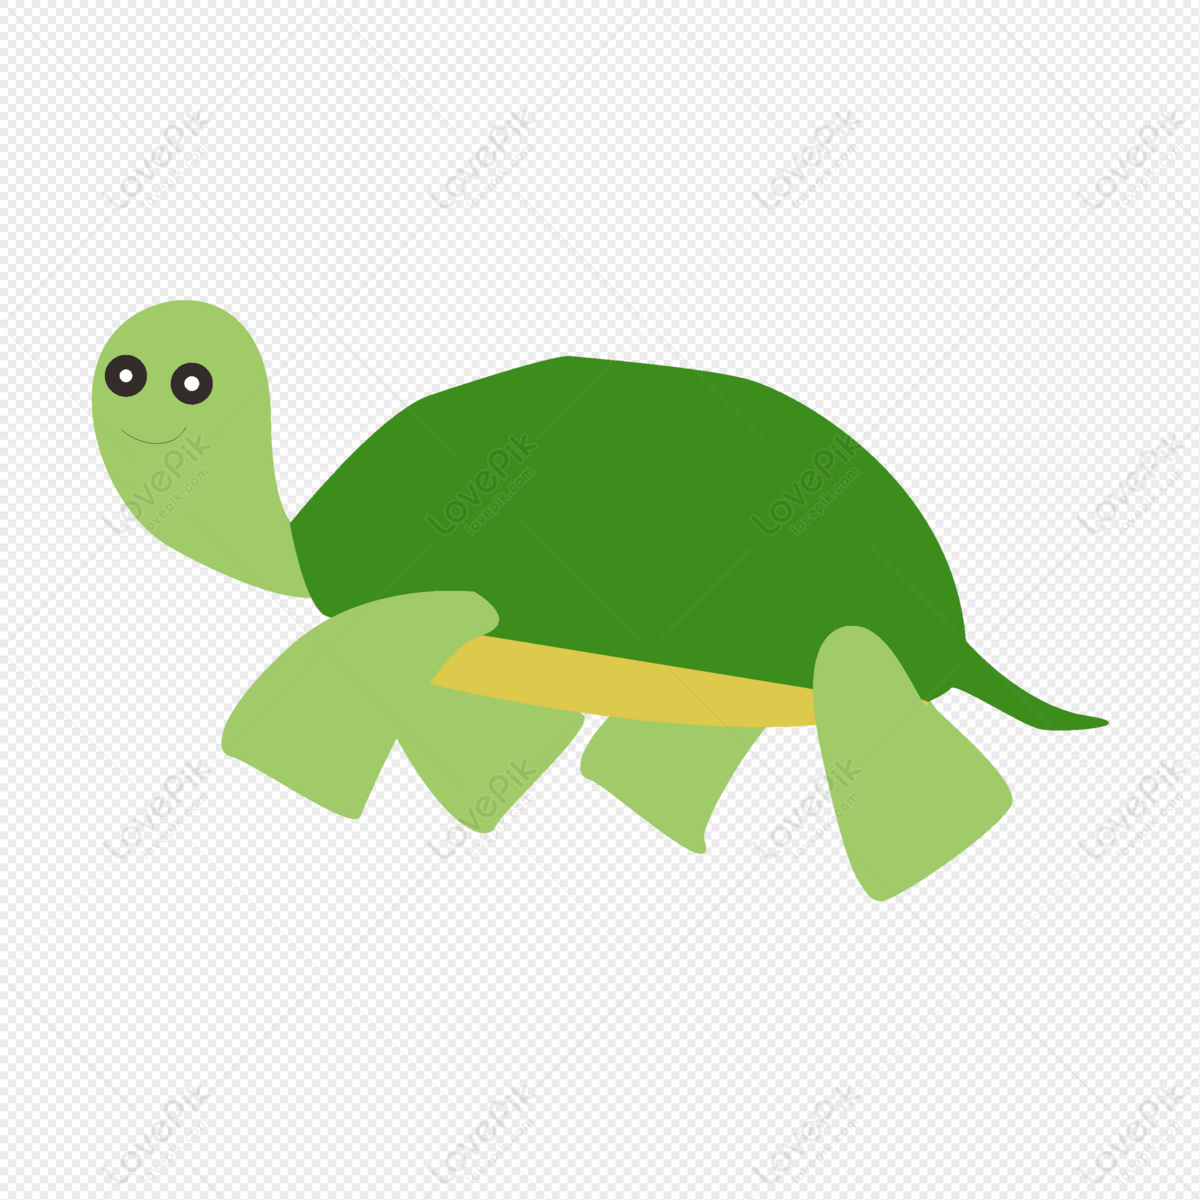 Cartoon Turtle PNG Image Free Download And Clipart Image For Free Download  - Lovepik | 401305301